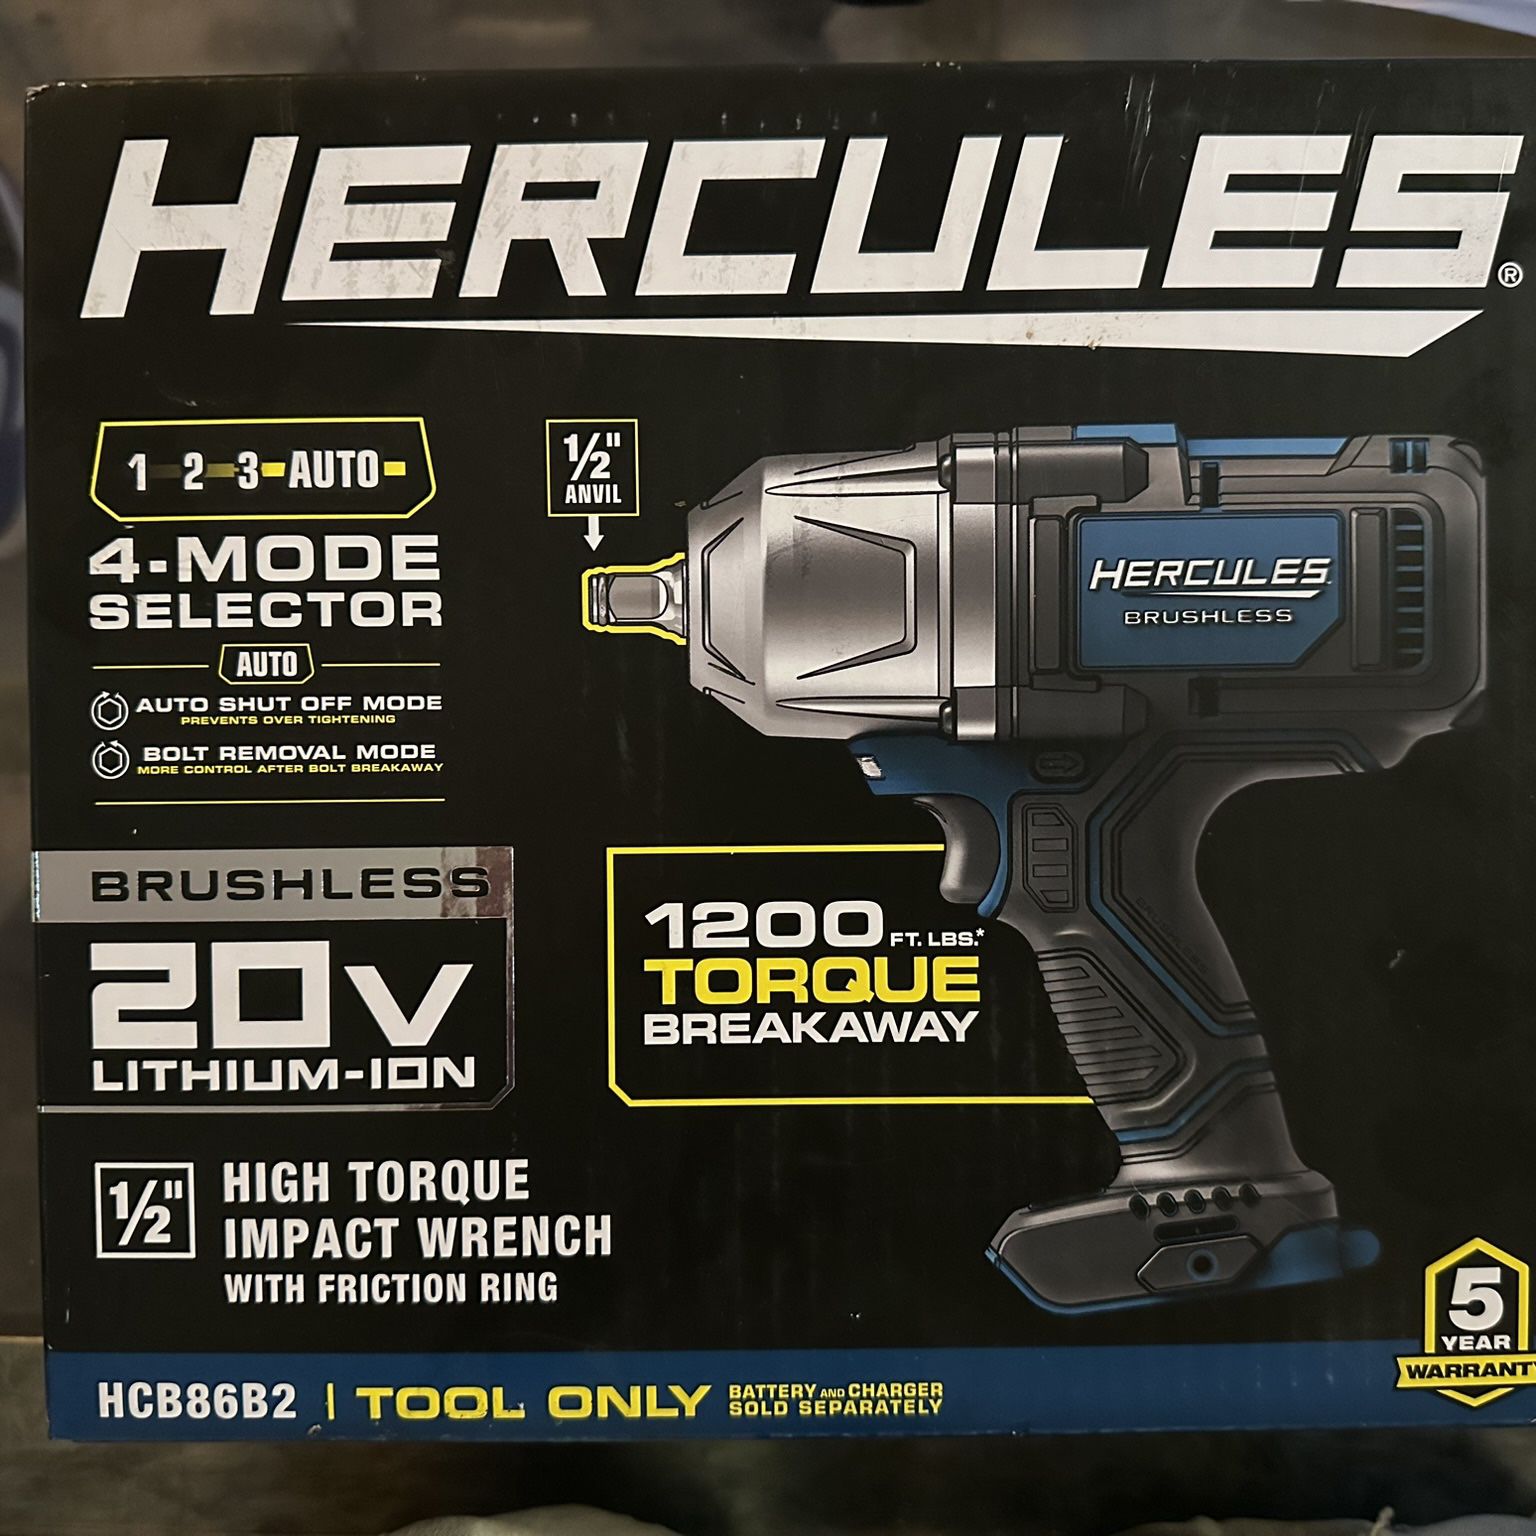 HERCULES HIGH TORQUE IMPACT WRENCH AND BRUSHLESS COMPACT IMPACT DRIVER HERCULES COMBO KIT